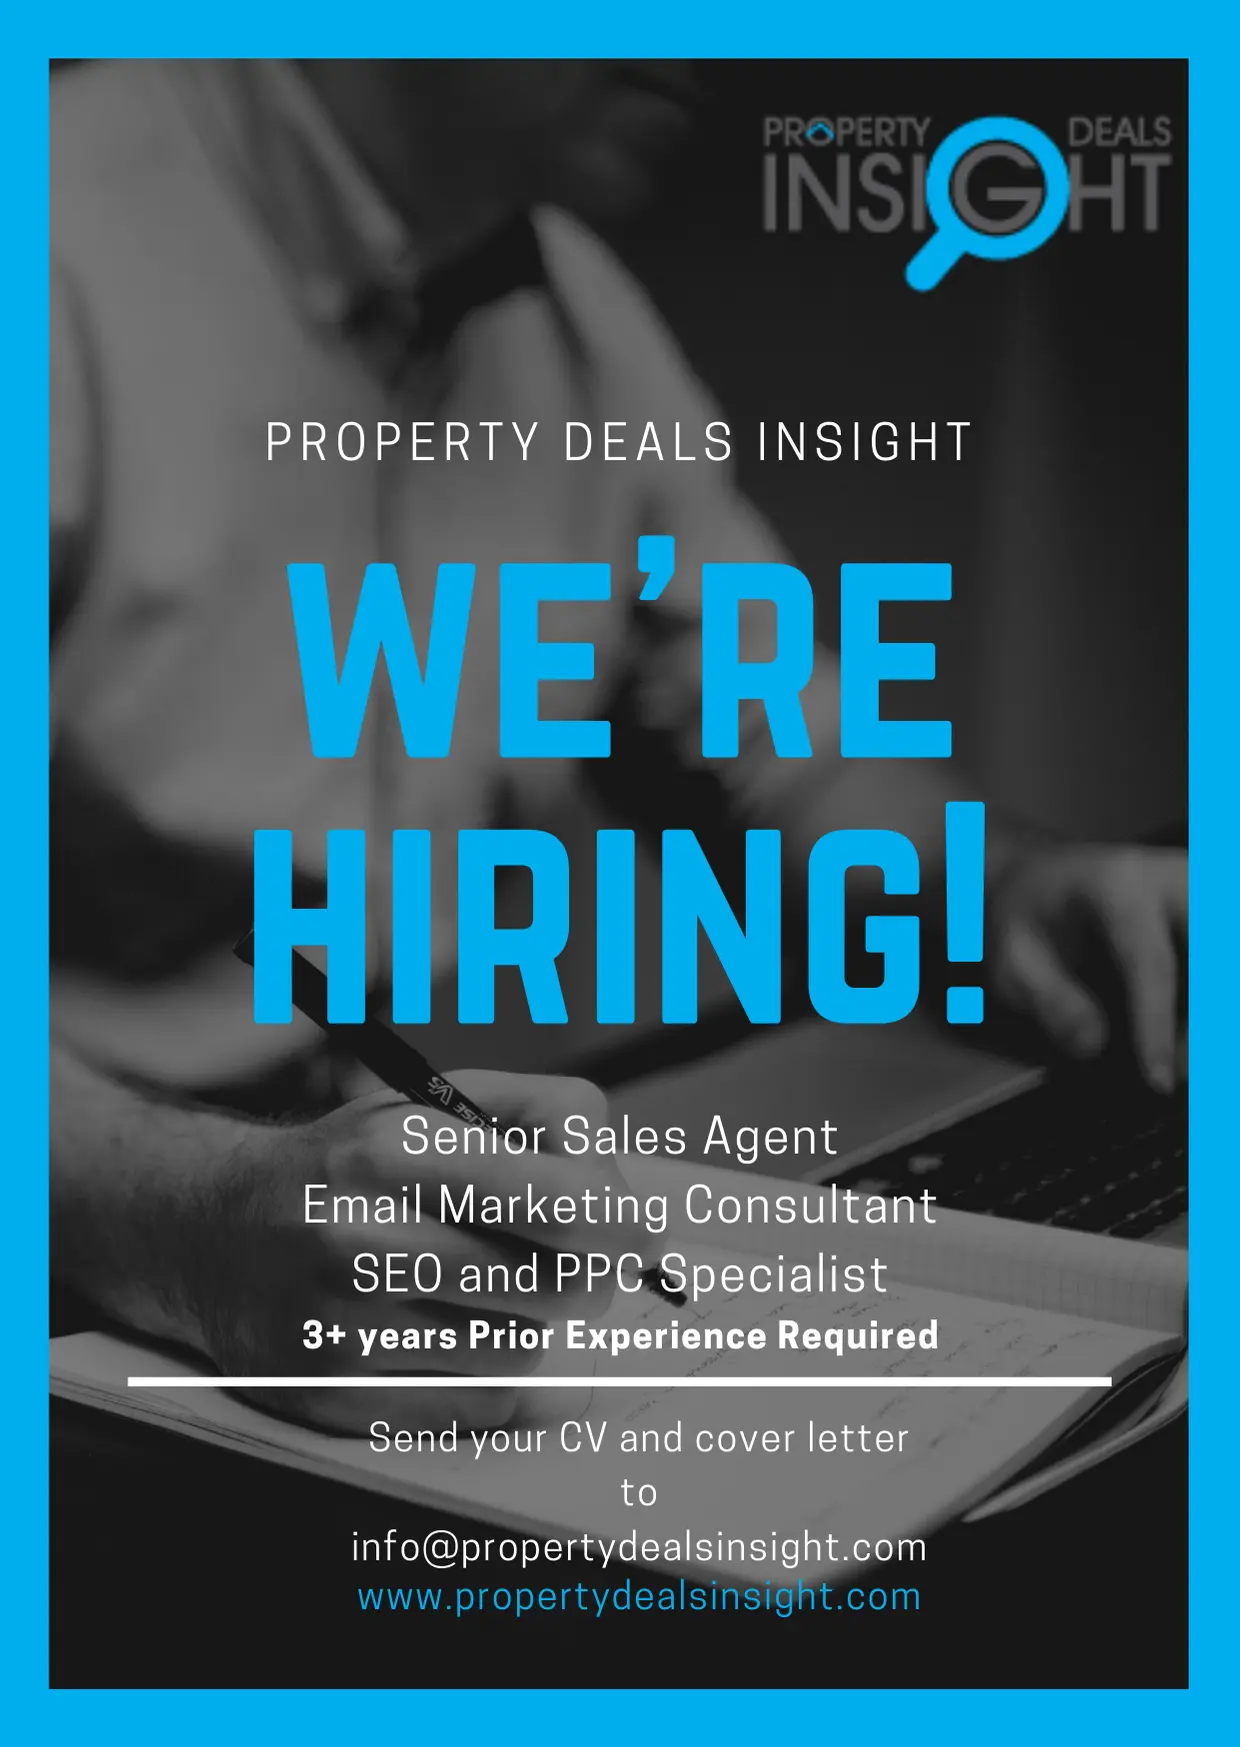 Property Deals Insight is hiring experienced members for our sales and marketing team. If you are someone who can make a real difference then send in your CV and a cover letter to info@propertydealsinsight.com. 3+ Experience required. #salesexpert #marketingexperts #hiringmarketing #propertydealsinsight